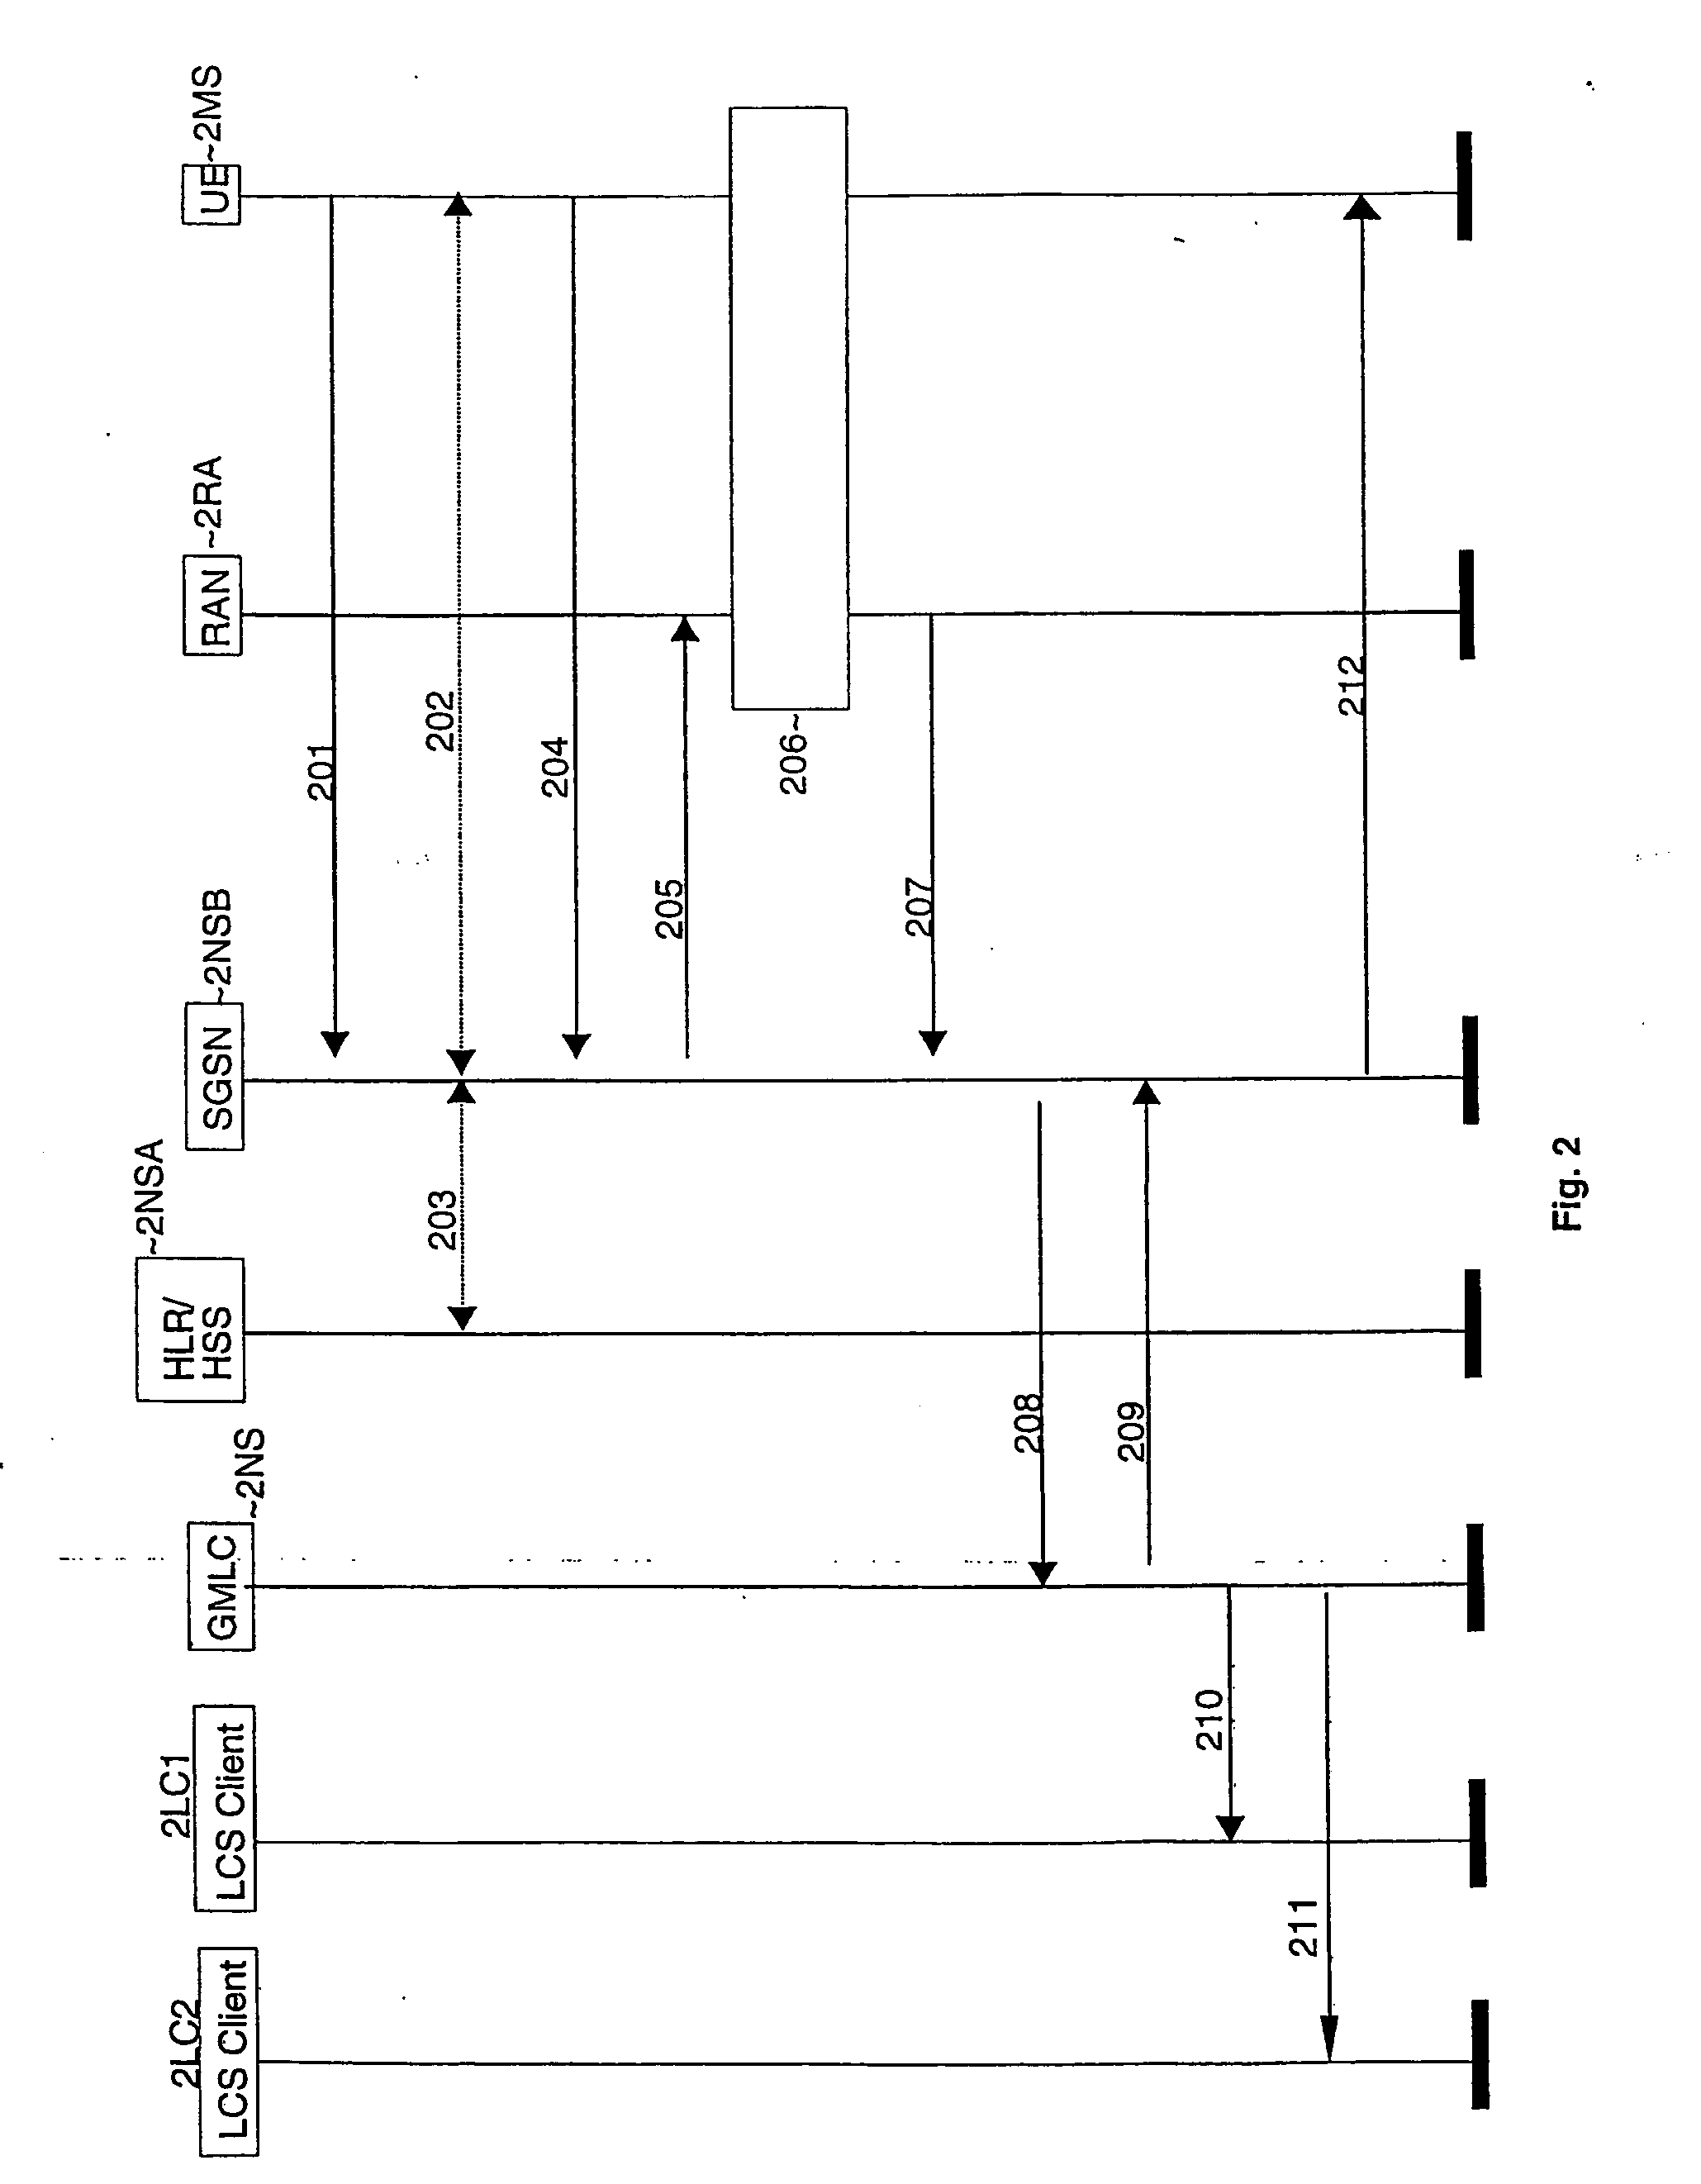 Method for enabling a location service client to contact a user of a mobile device